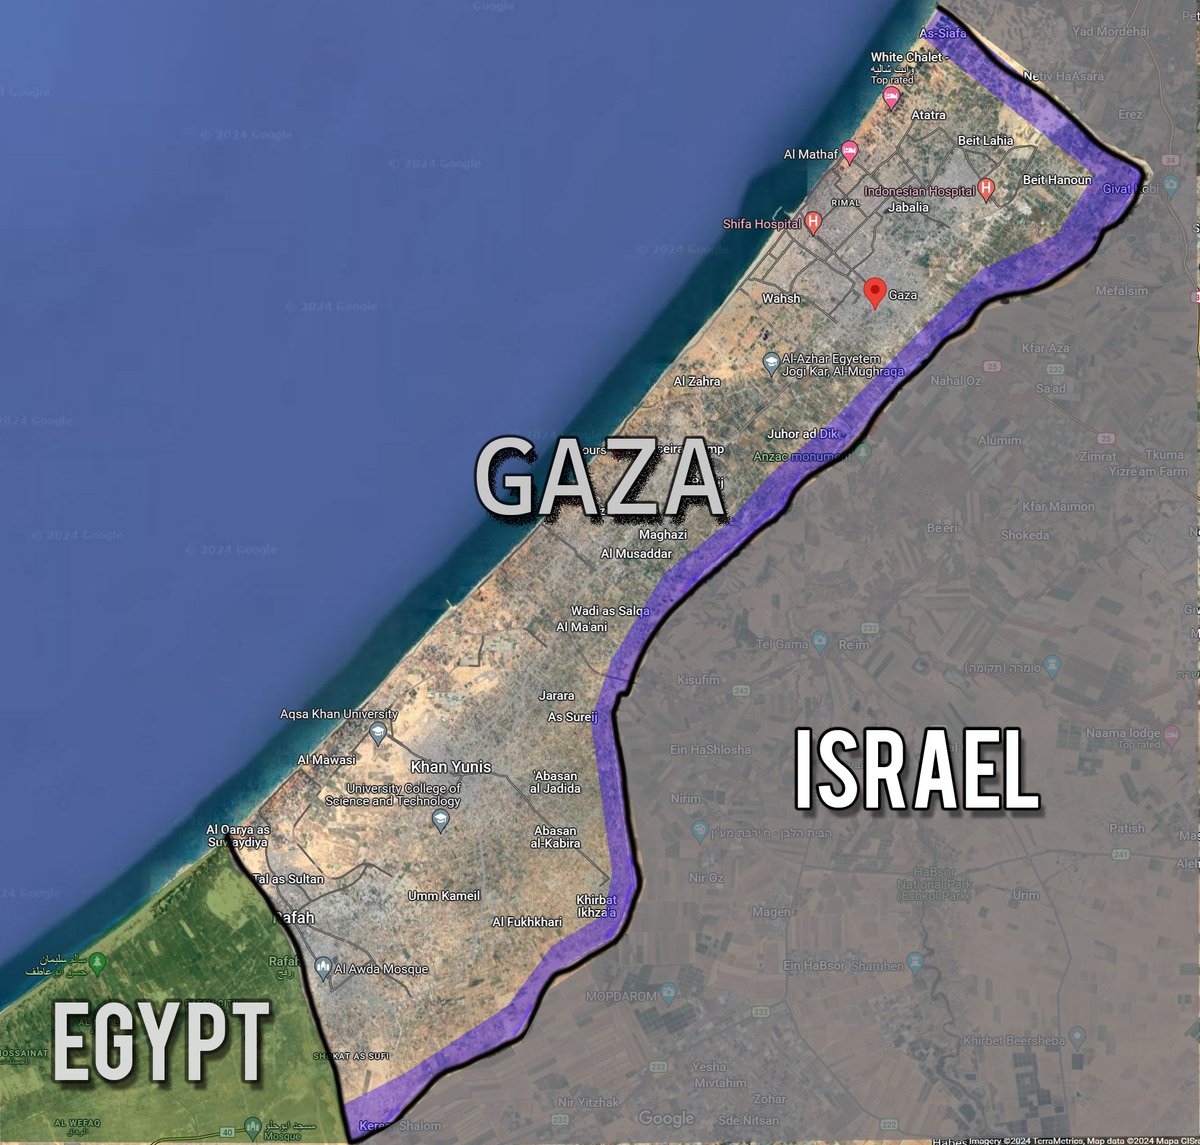 The Day After.
Israel is creating a permanent 1 km buffer zone within GAZA's borders. Buildings in this zone are being demolished creating a no man's land. 

This area may be lined with land mines & turrets. Gazans entering will likely be fired upon.
Was it worth it?